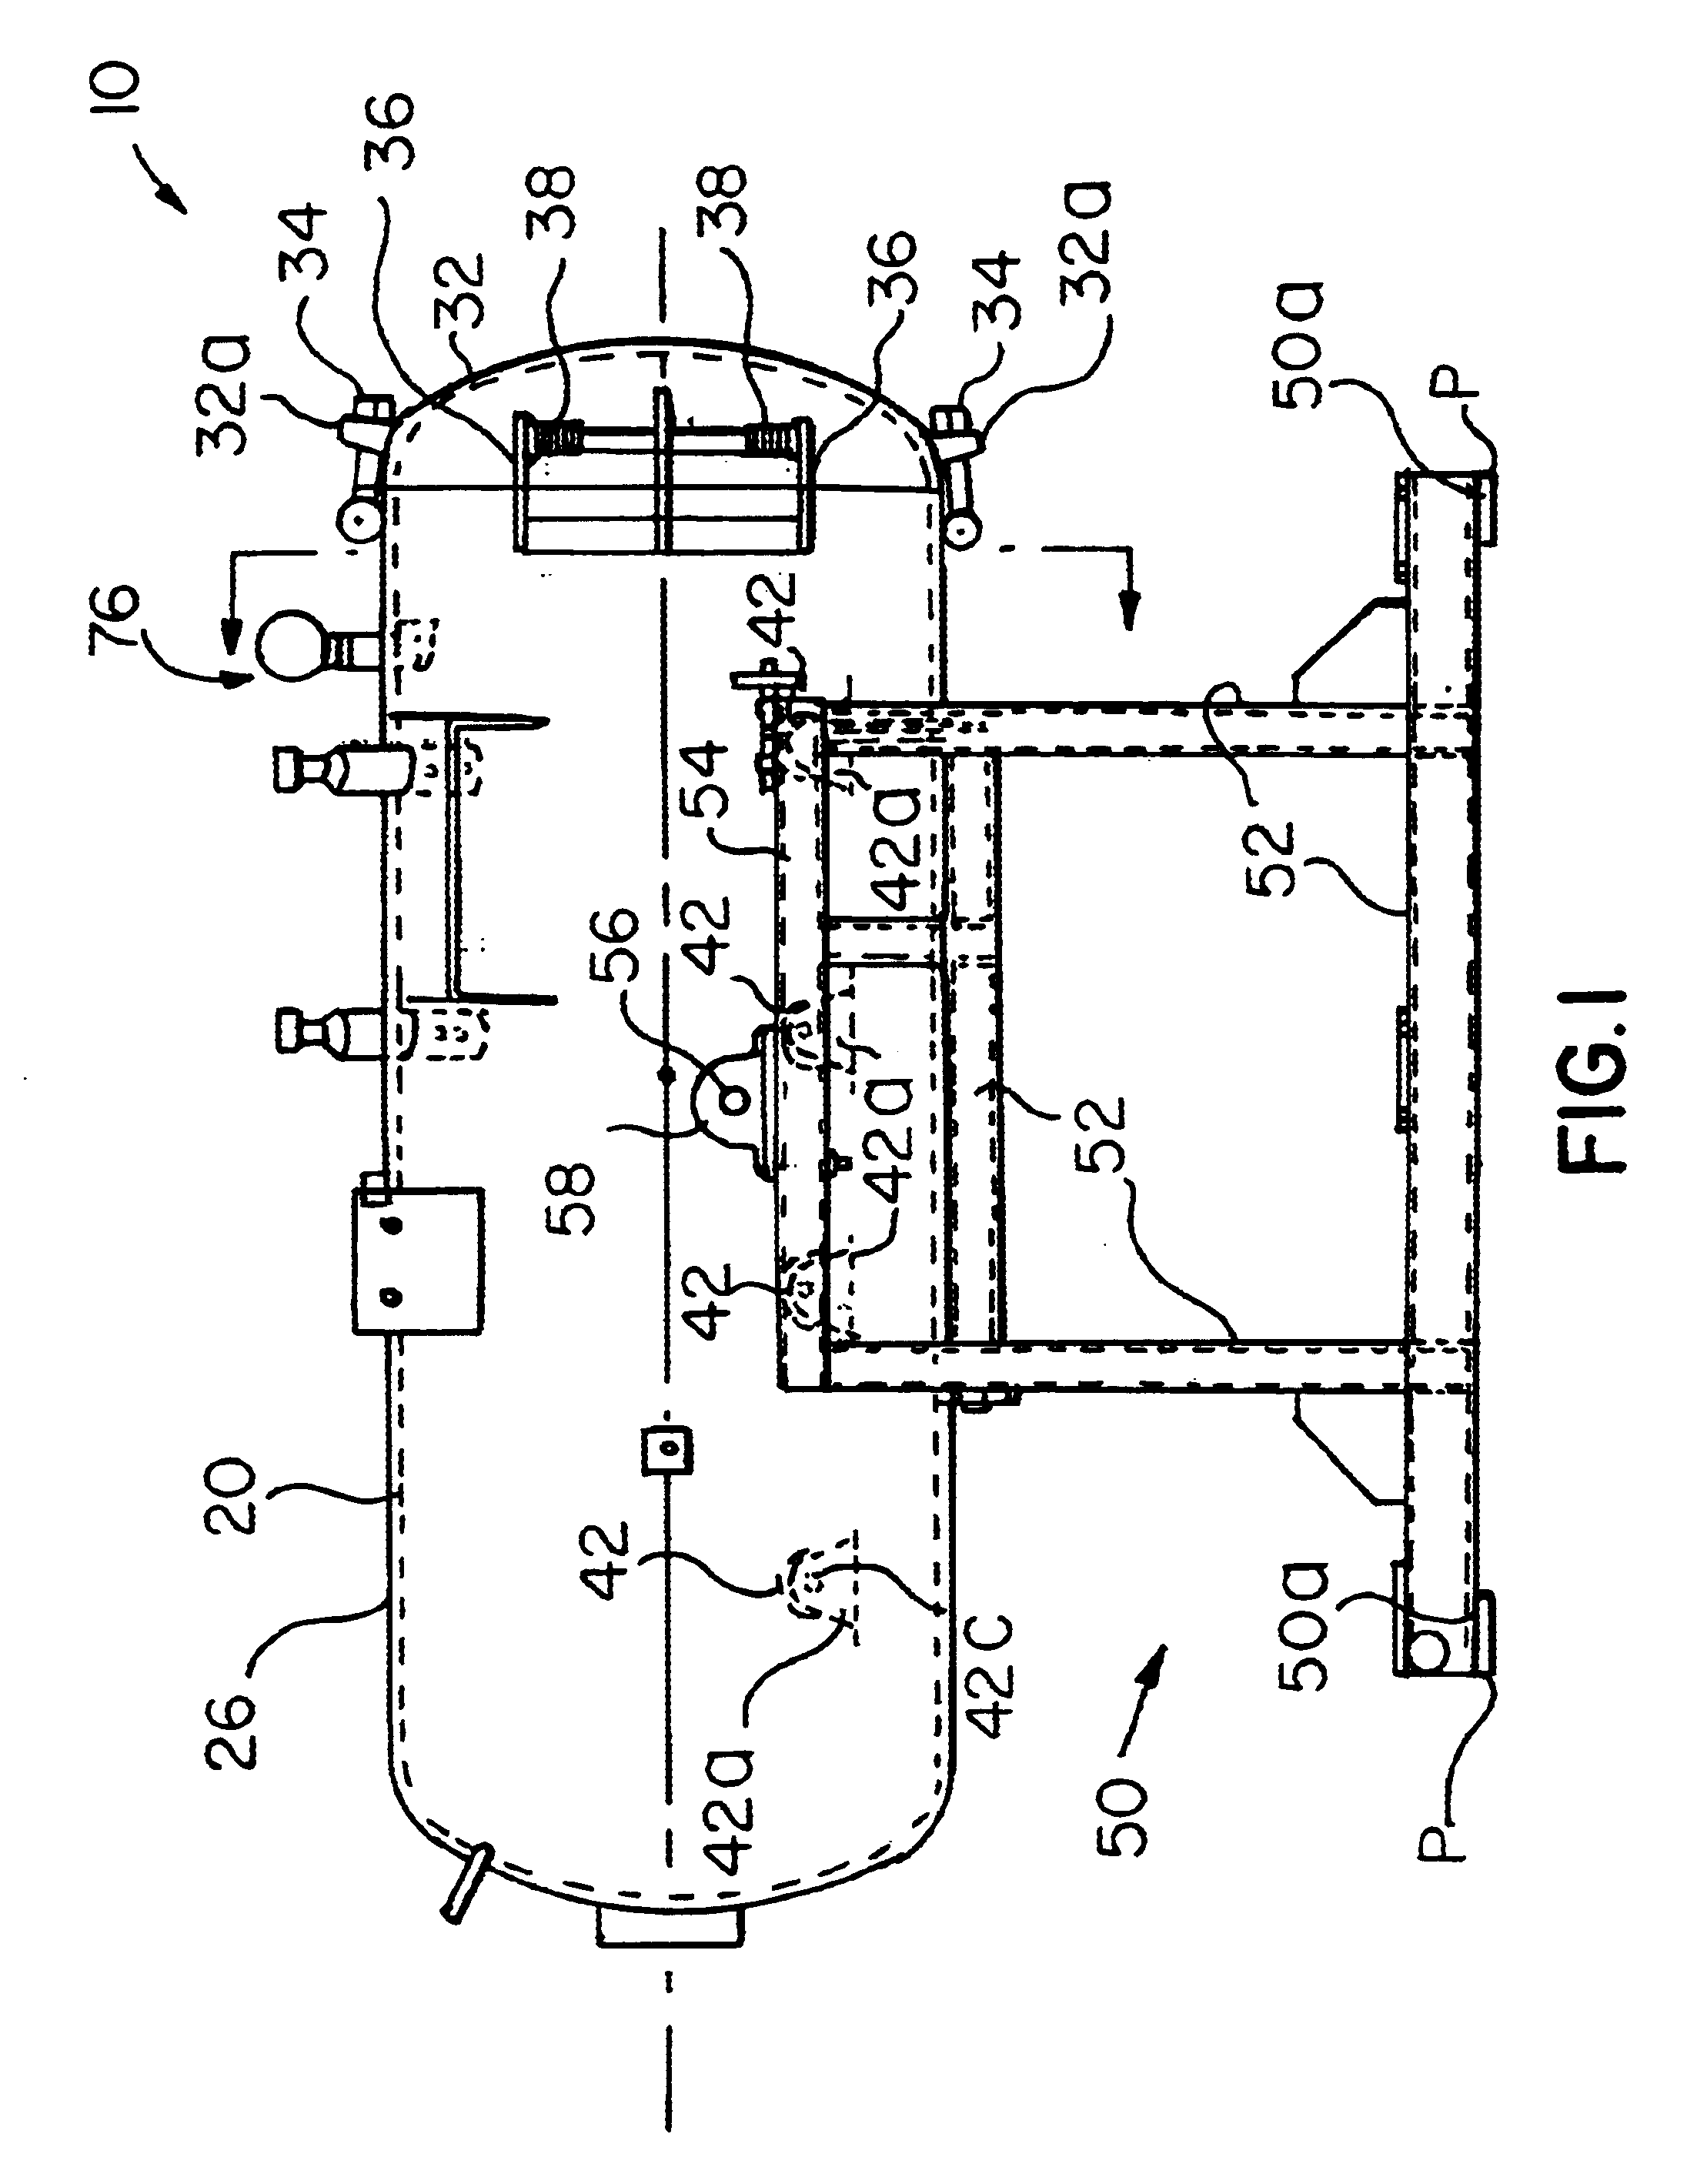 Apparatus for safely containing and delivering hazardous fluid substances from at least two supply cylinders